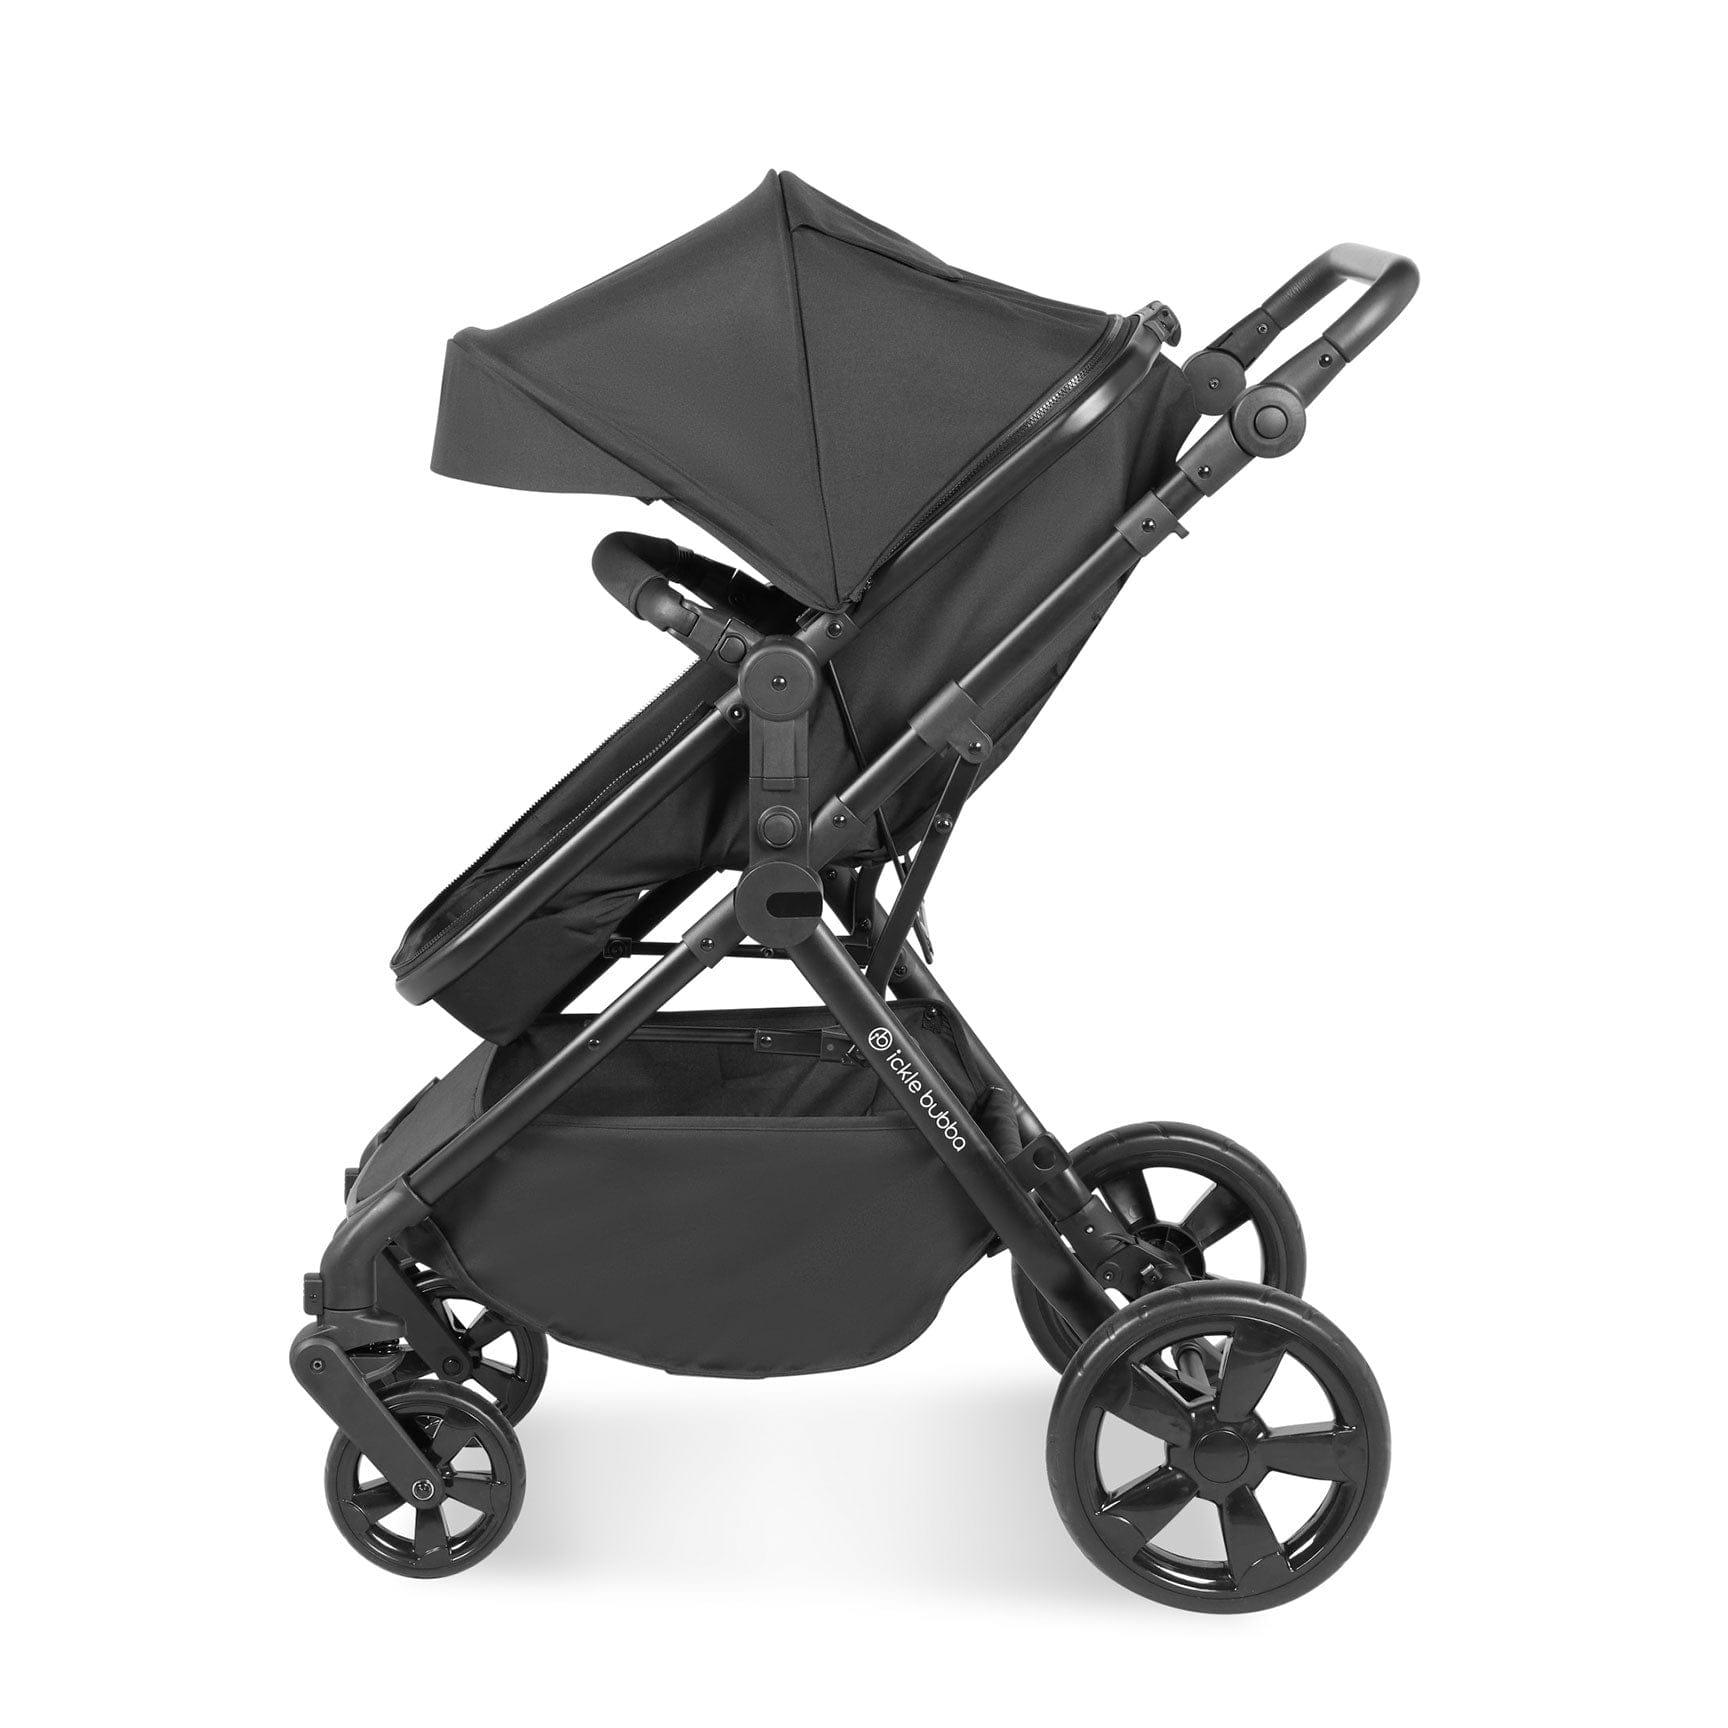 Ickle Bubba Comet 3-in-1 Travel System with Astral Car Seat in Black Baby Prams 10-008-101-002 5056515025750